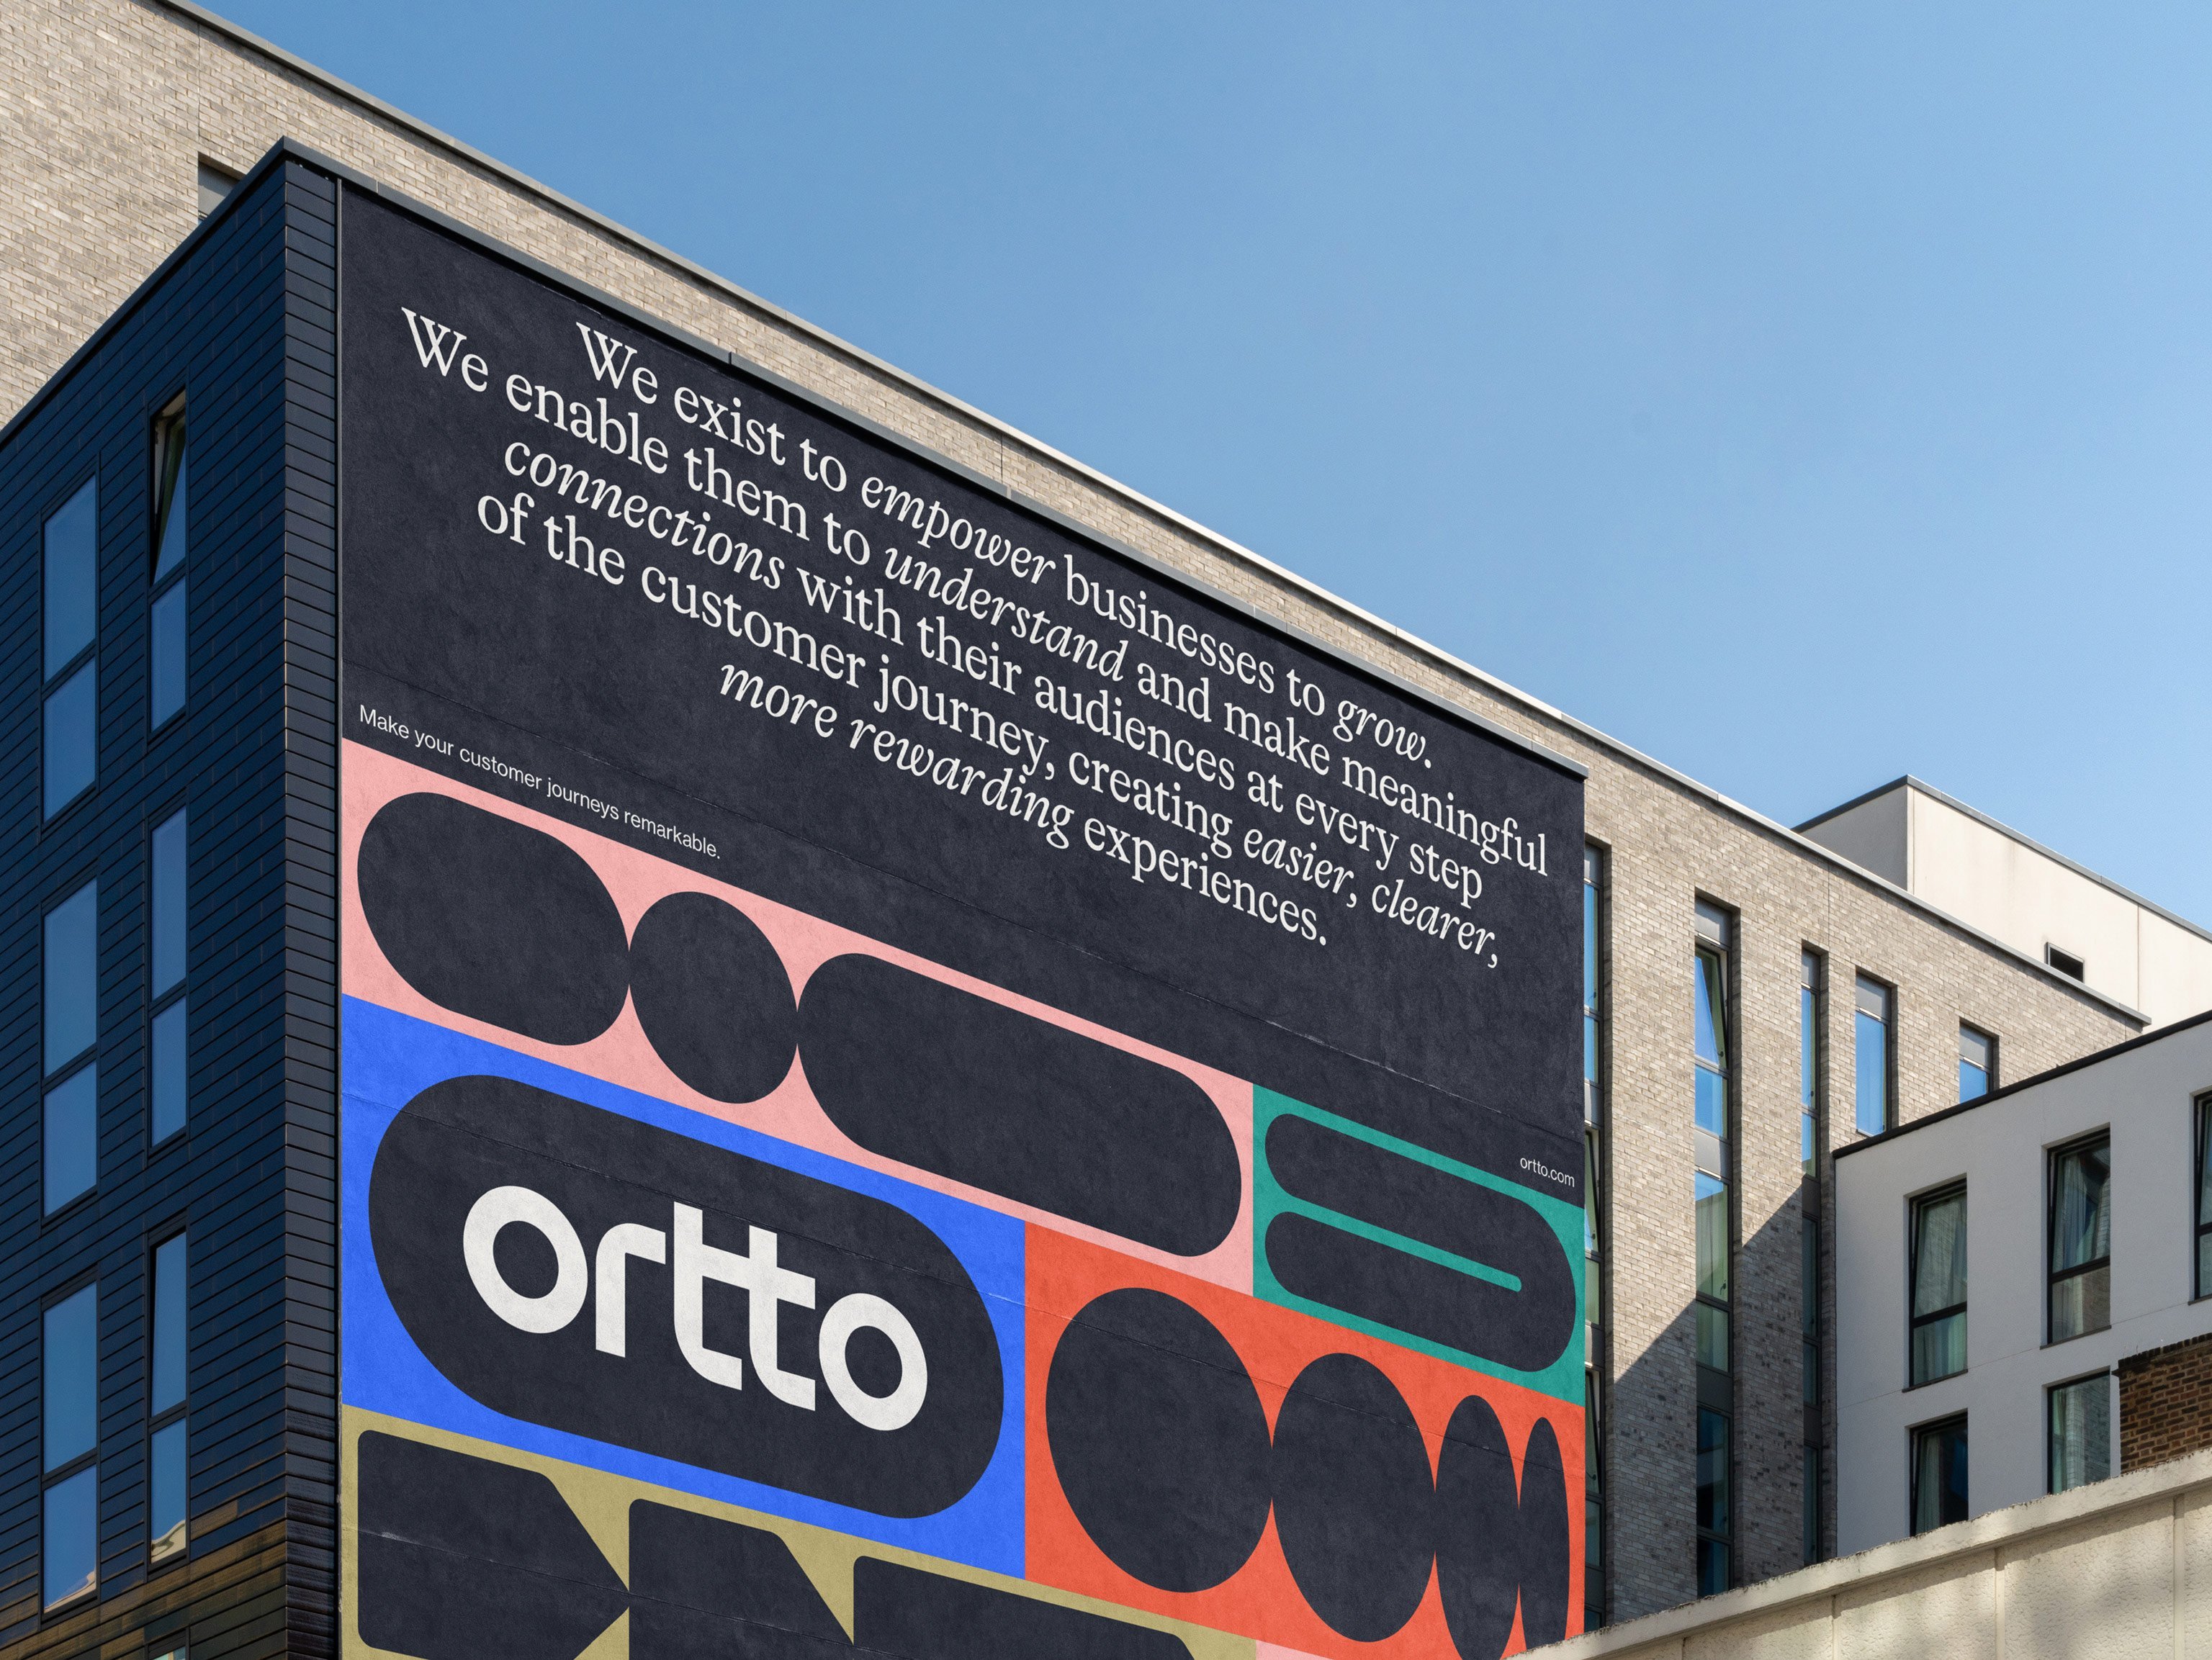 Brand identity and OOH advertising poster for automation, analytics and customer journey company Ortto designed by Christopher Doyle & Co